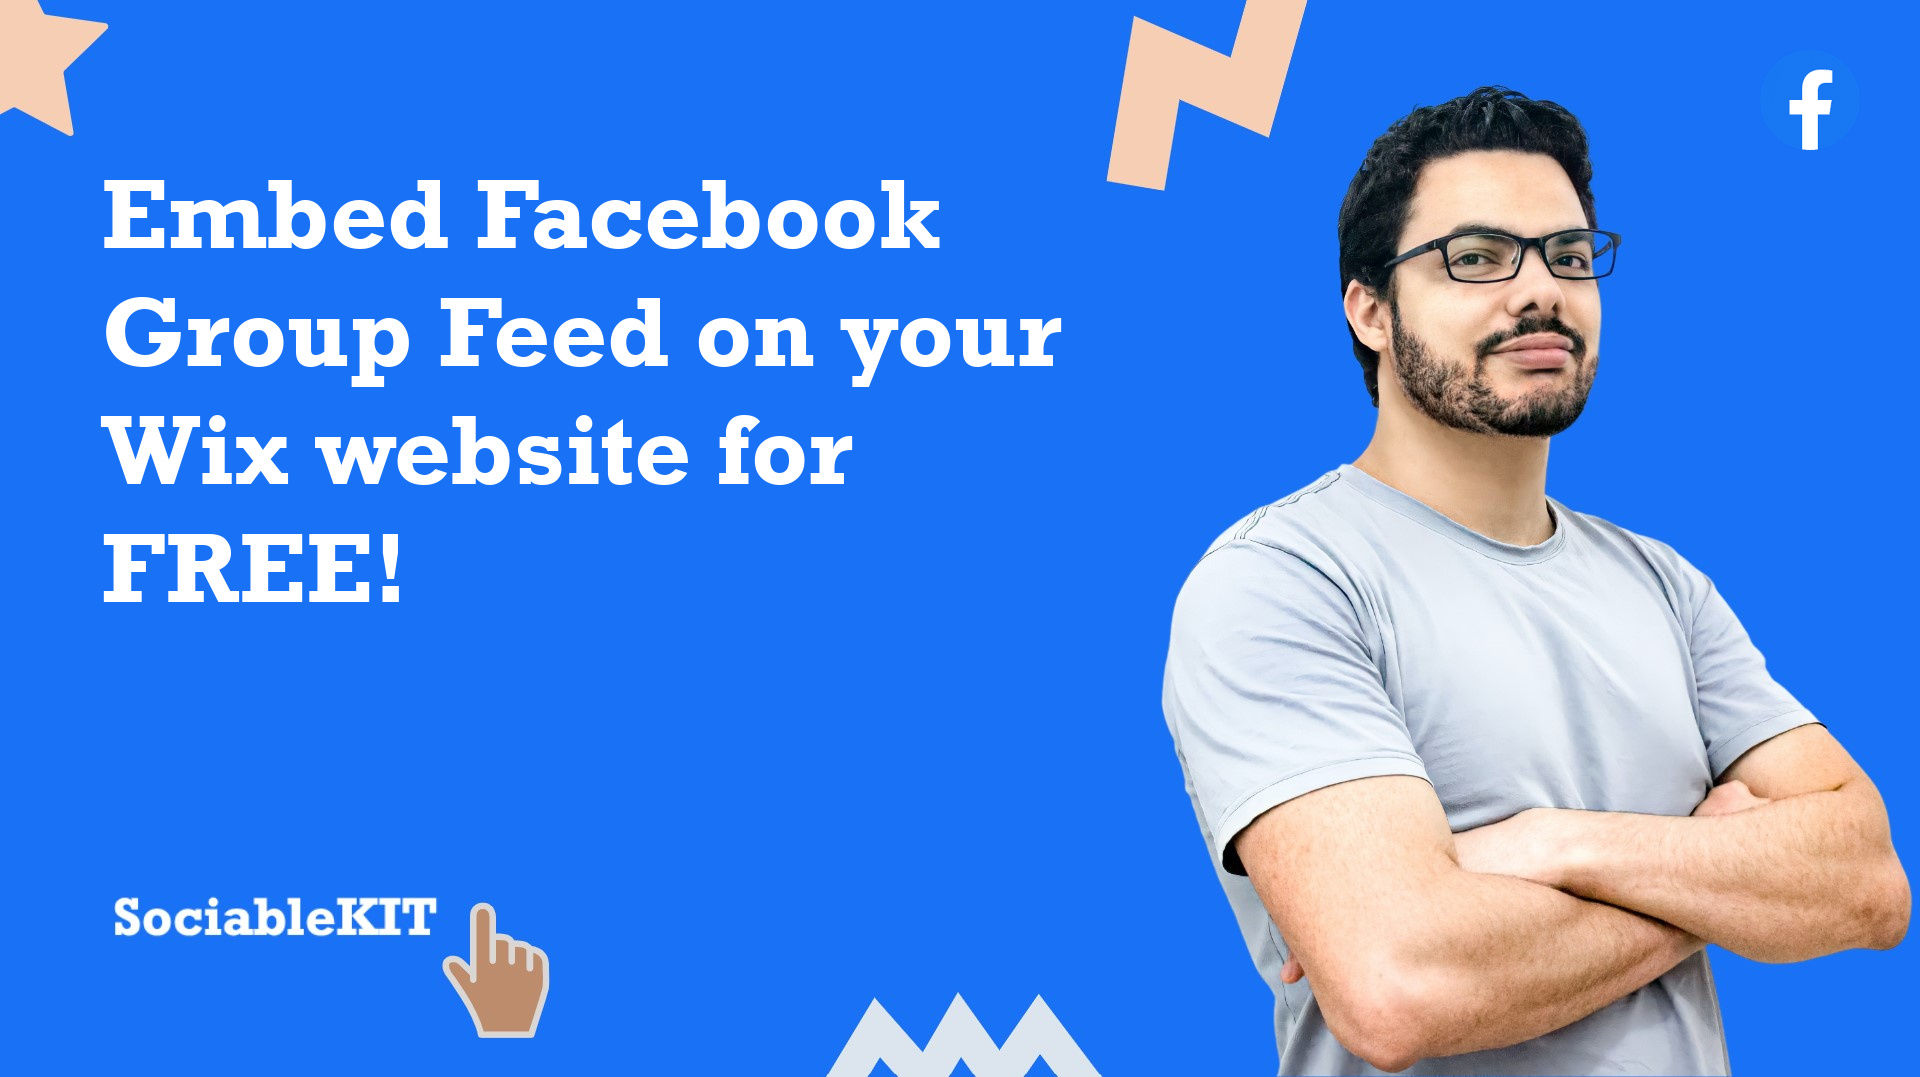 How to embed Facebook Group Feed on your Wix website for FREE?